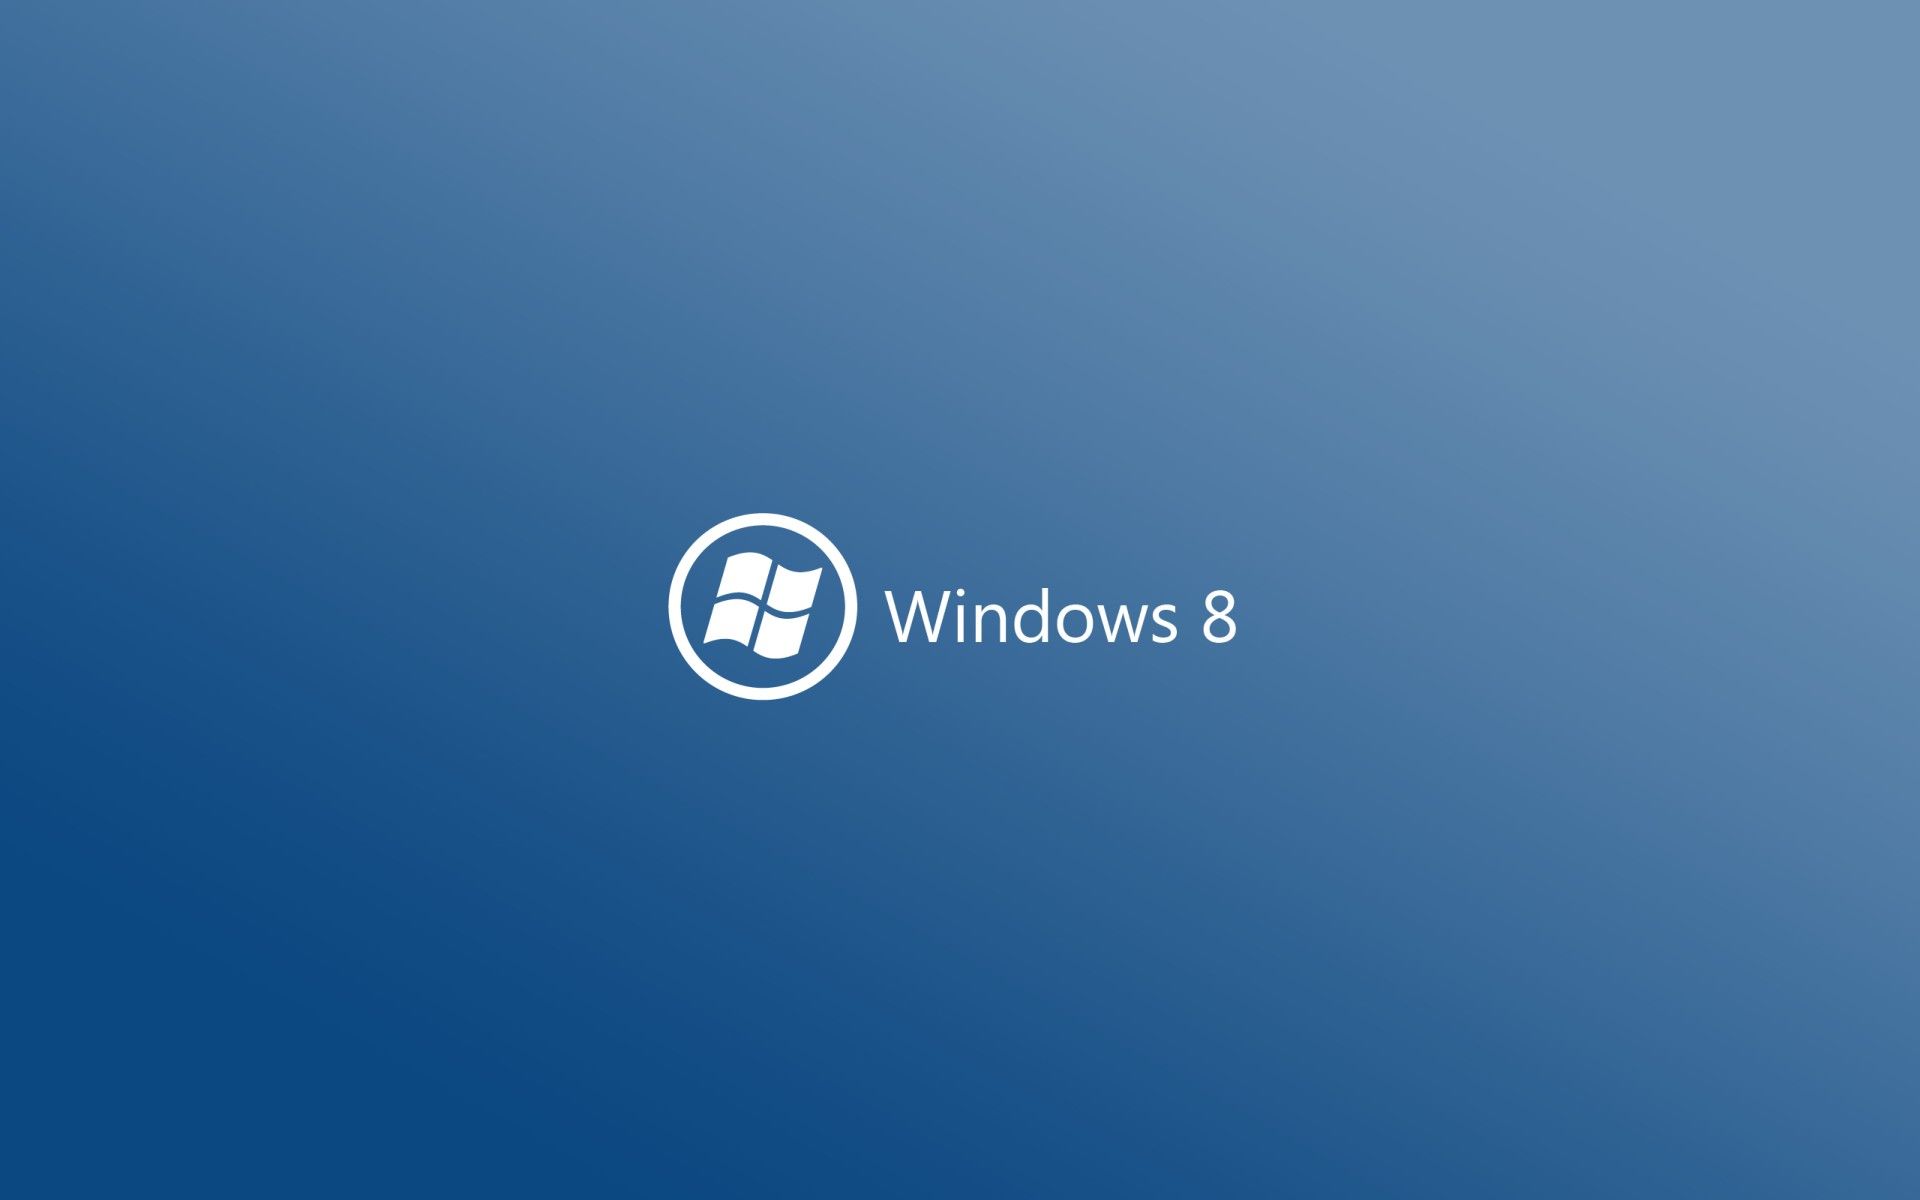 Windows 8 wallpapers for PC Desktop Full HD Pictures